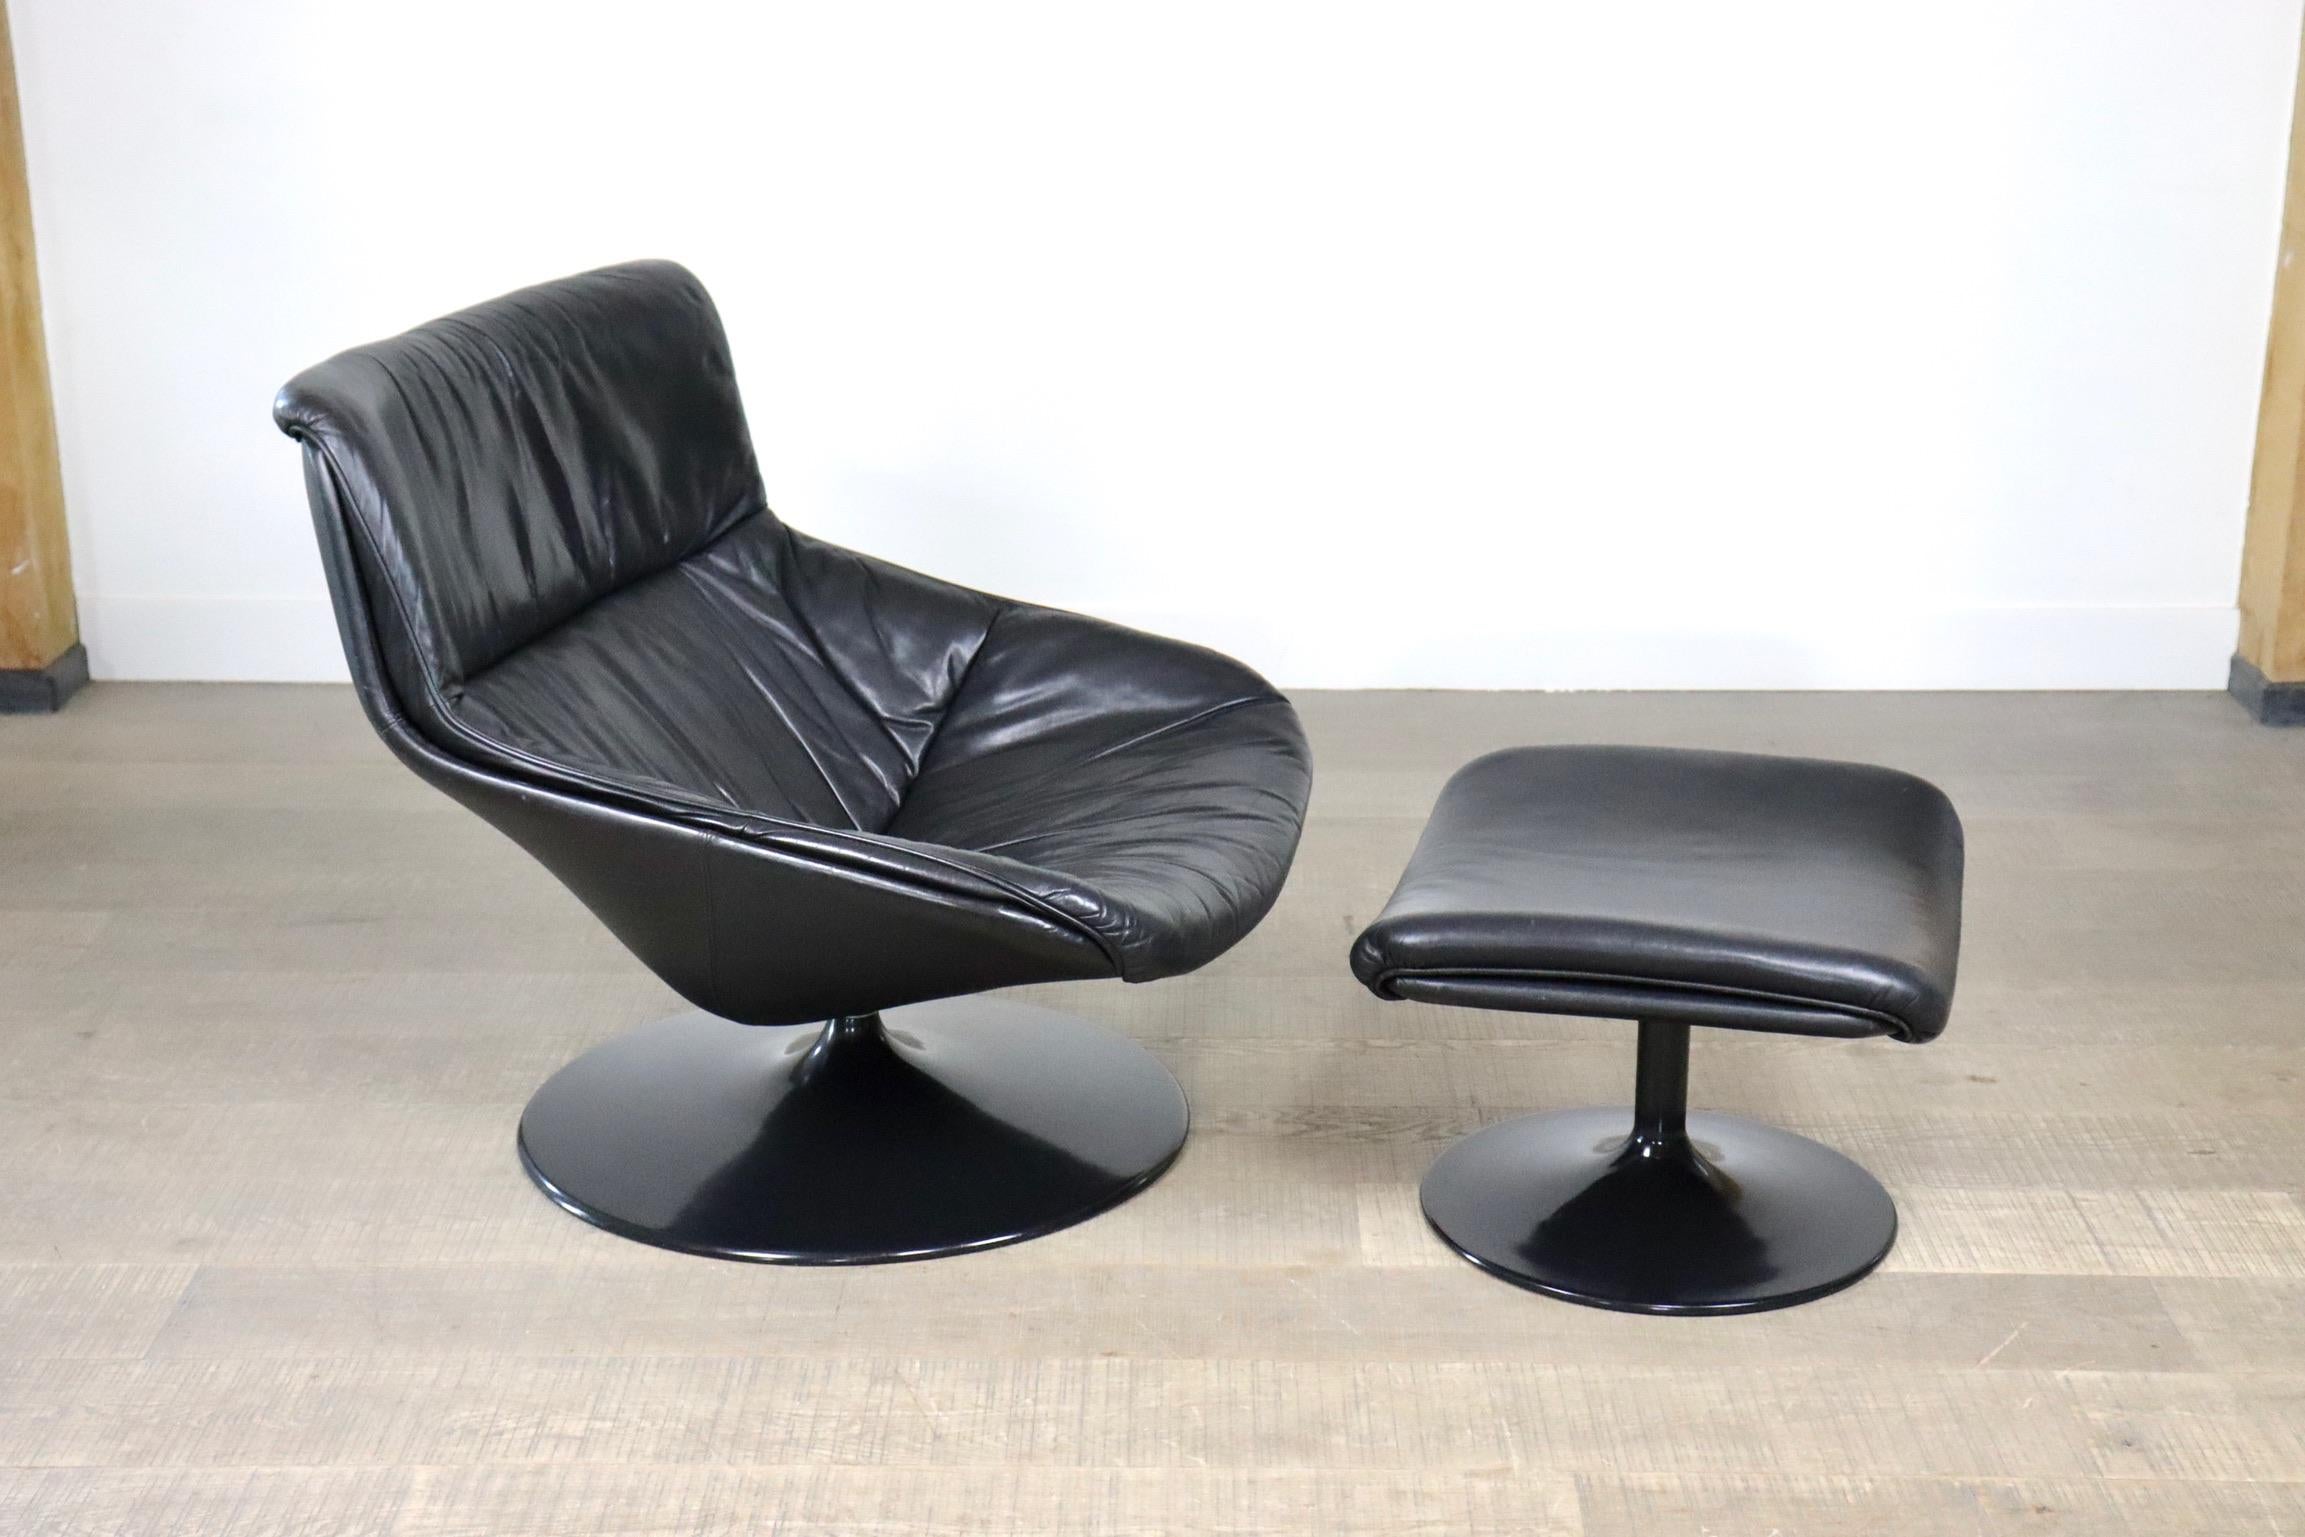 Stunning and very comfortable F522 lounge chair with ottoman black on black edition by Geoffrey harcourt for Artifort, 1960s. The black leather is in very good condition and with its iconic design the space will instantly get a luxurious feeling.